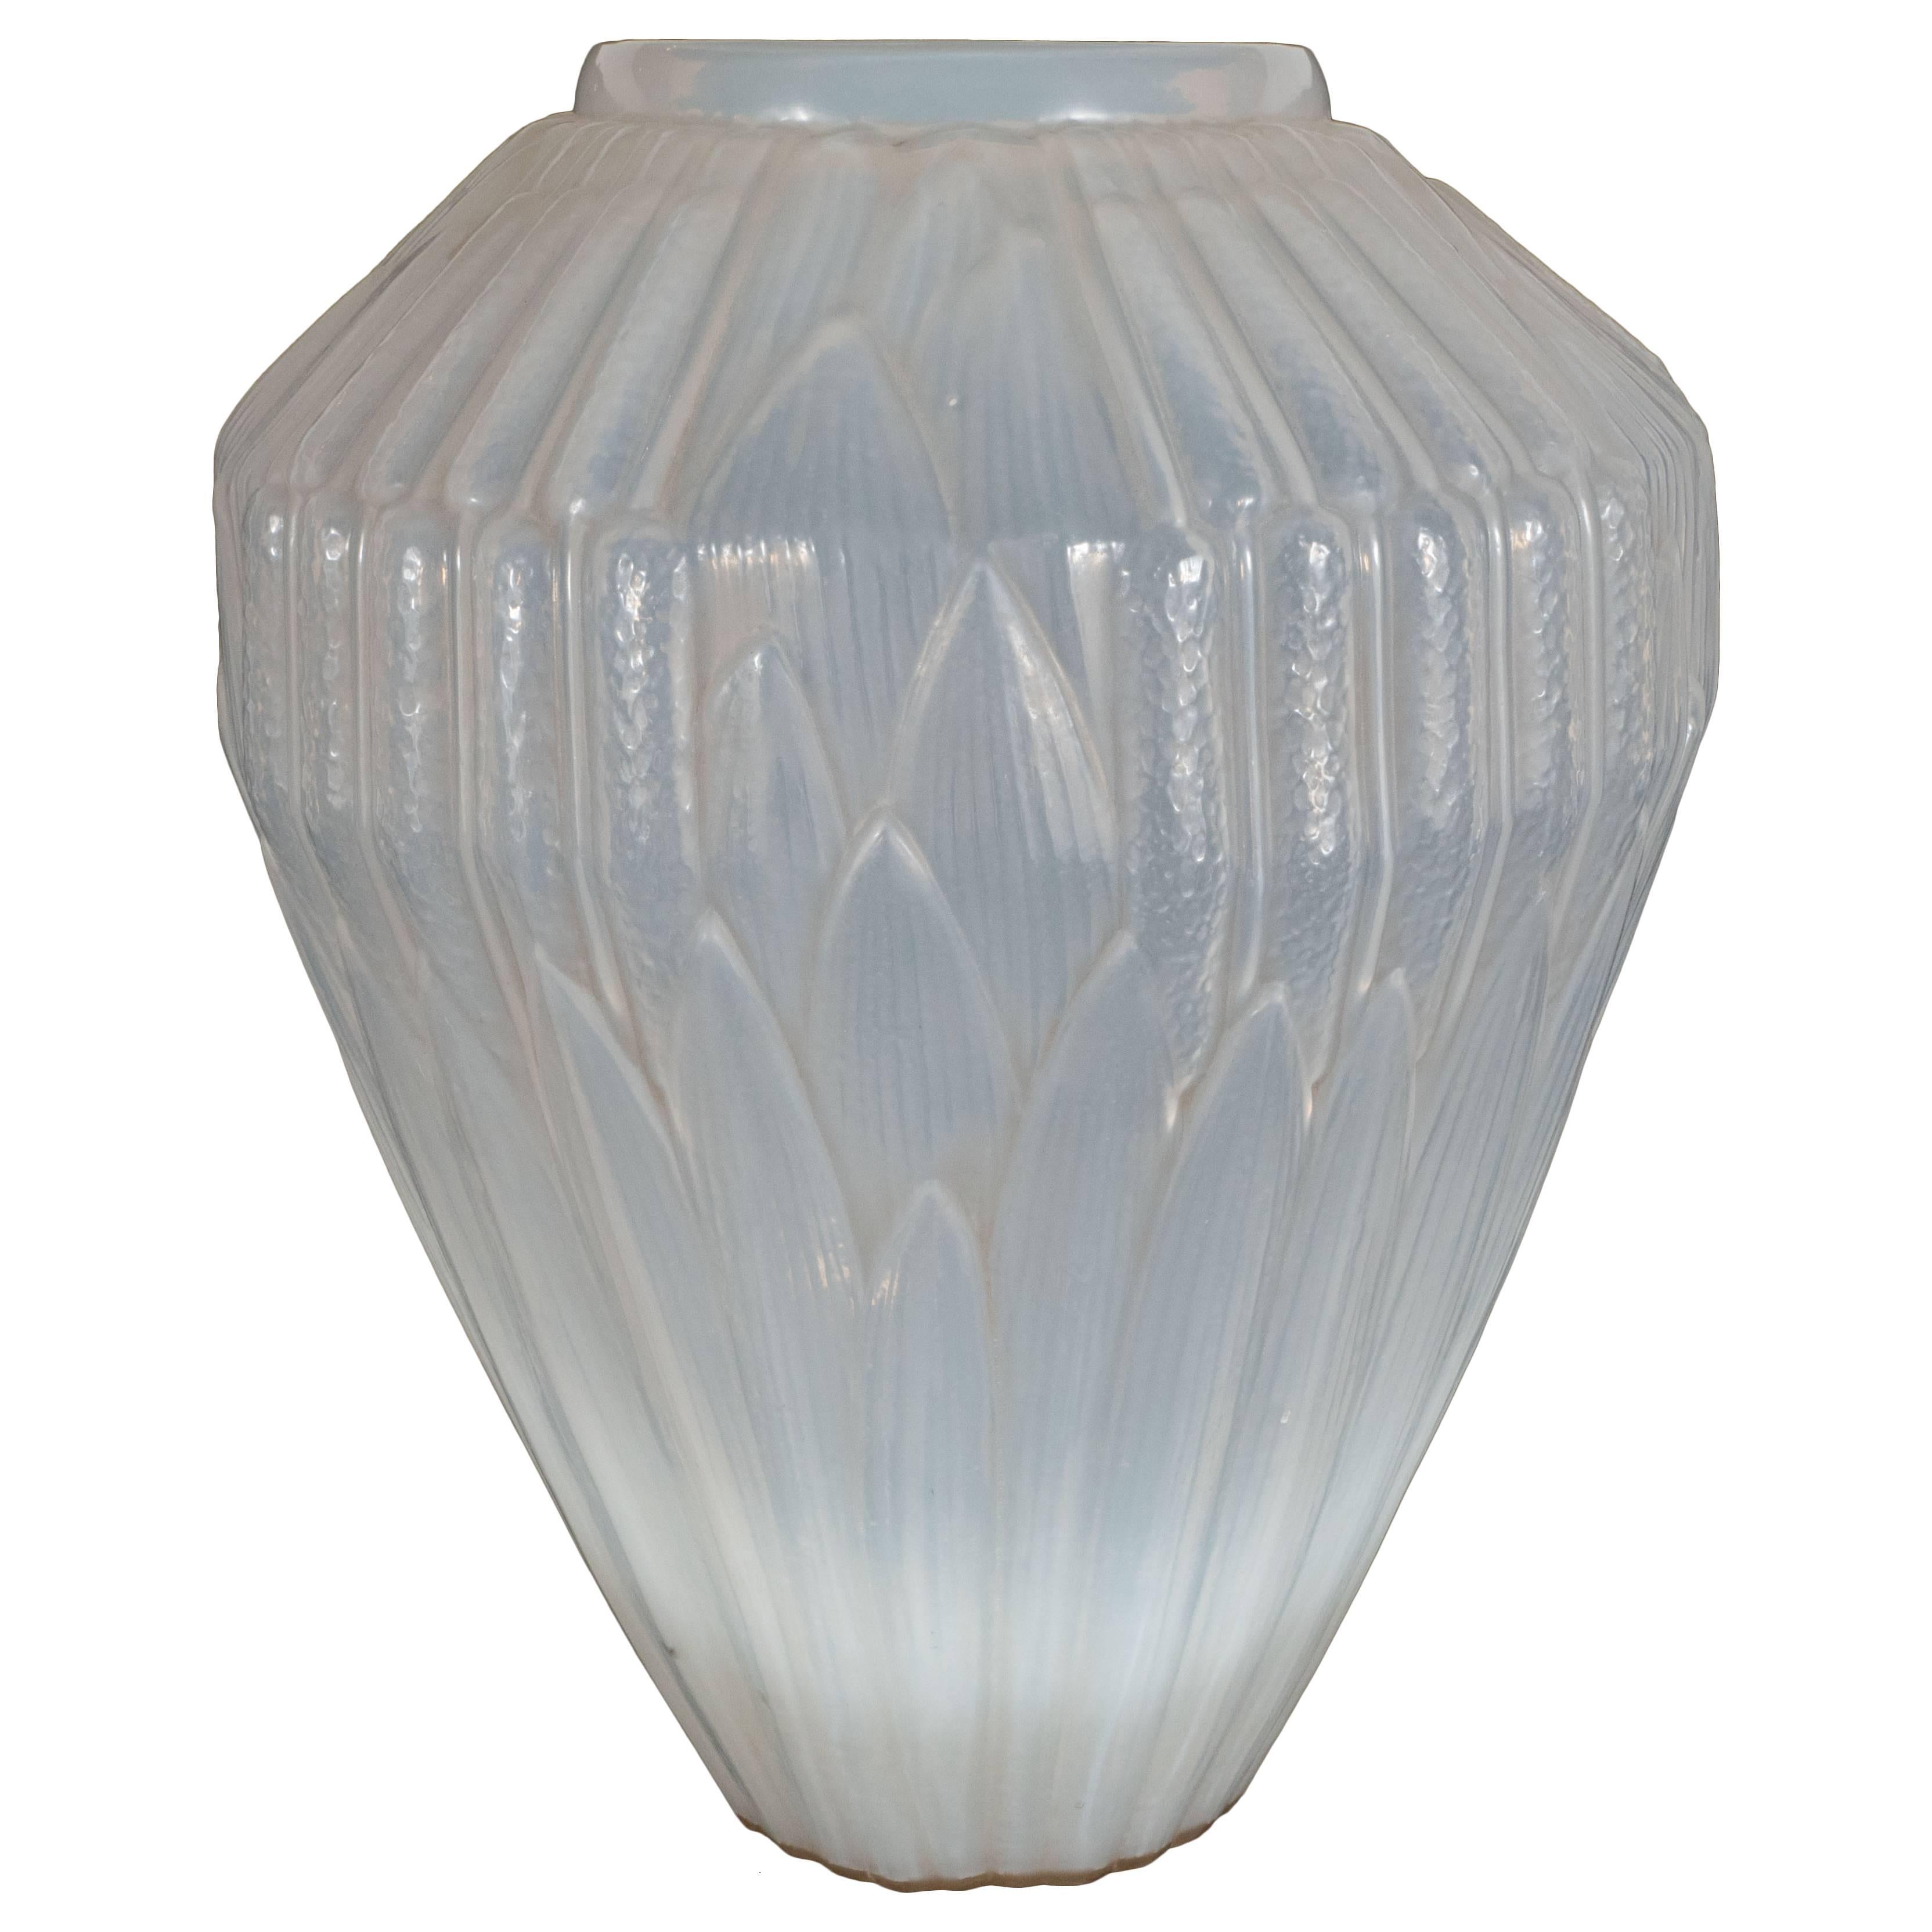 Art Deco Opalescent Handblown Vase with Geometric Patterns by Andre Hunebelle